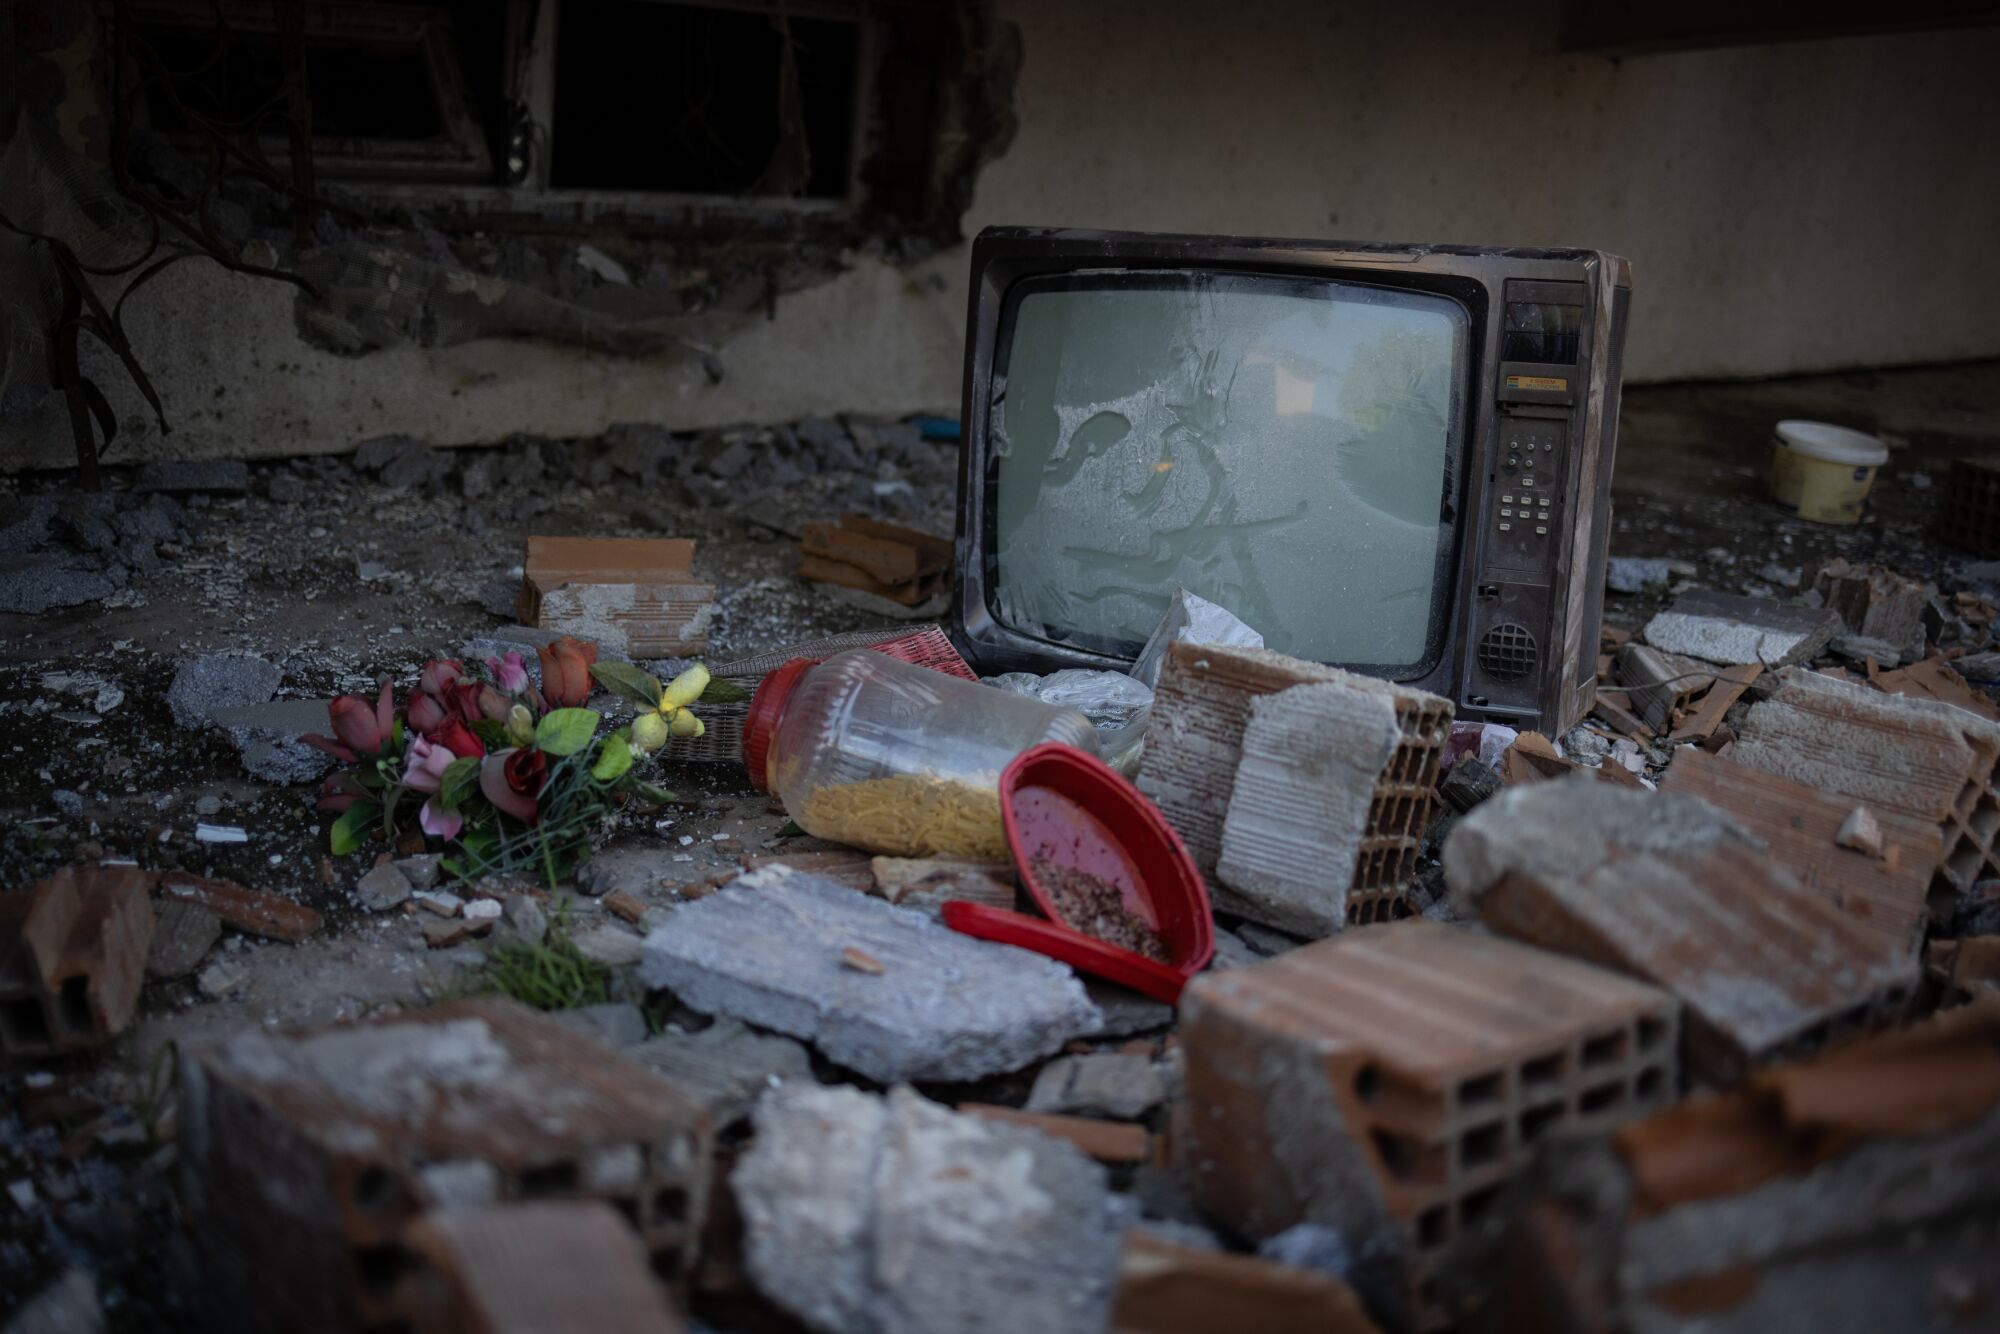 A television and flowers can be seen amid rubble outside destroyed buildings in Antakya, Turkey.